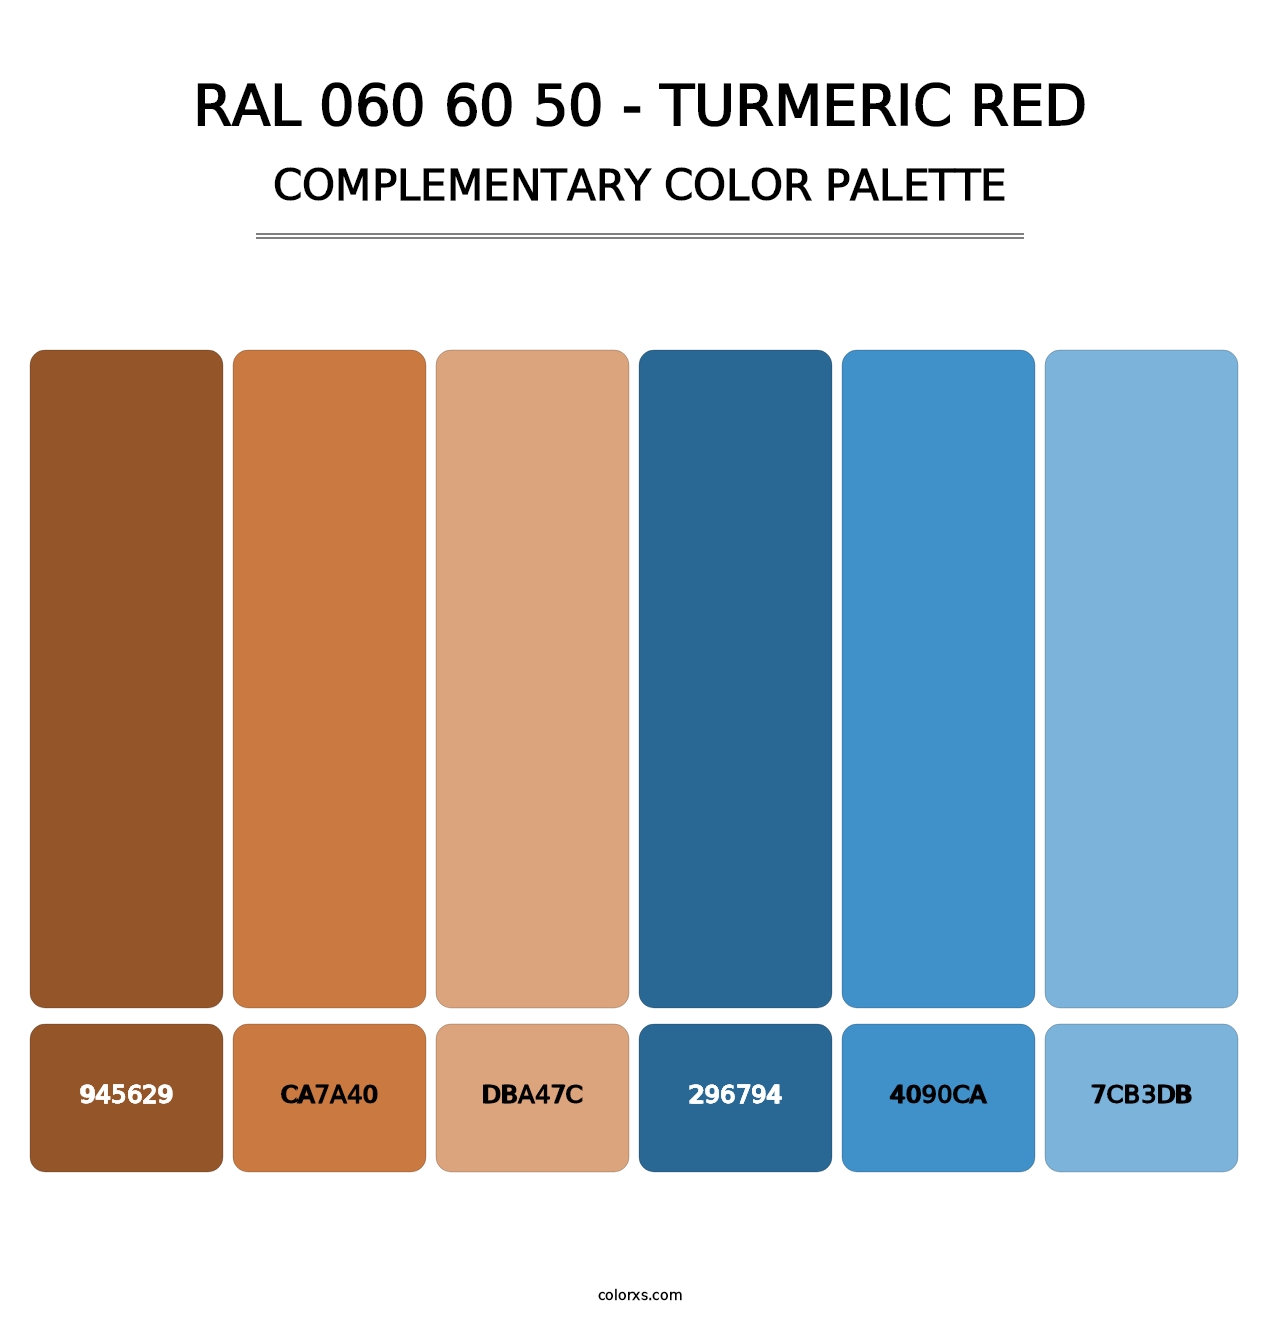 RAL 060 60 50 - Turmeric Red - Complementary Color Palette